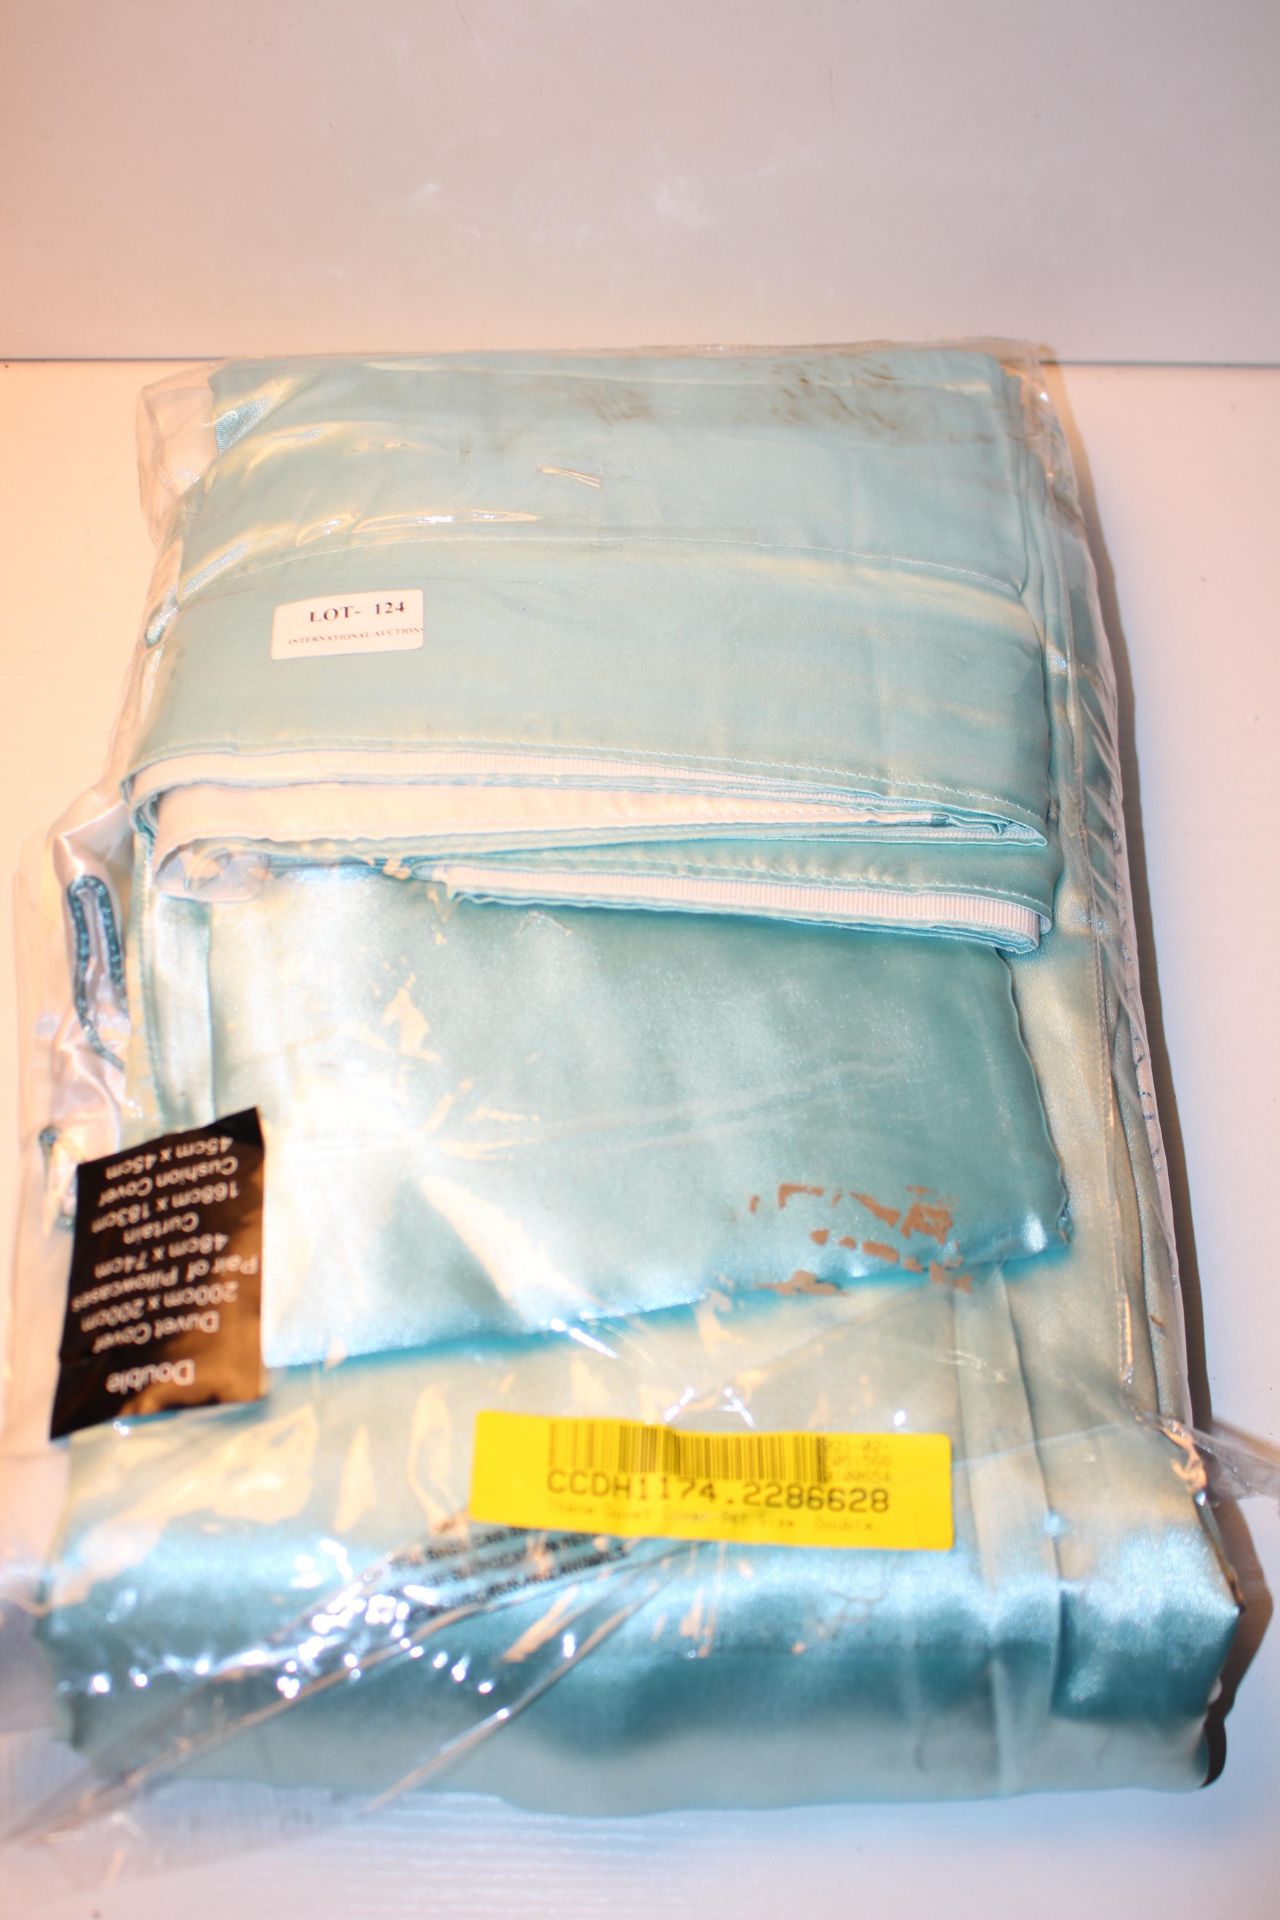 BAGGED THANE DOUBLE DUVET COVER SET RRP £44.99Condition ReportAppraisal Available on Request- All